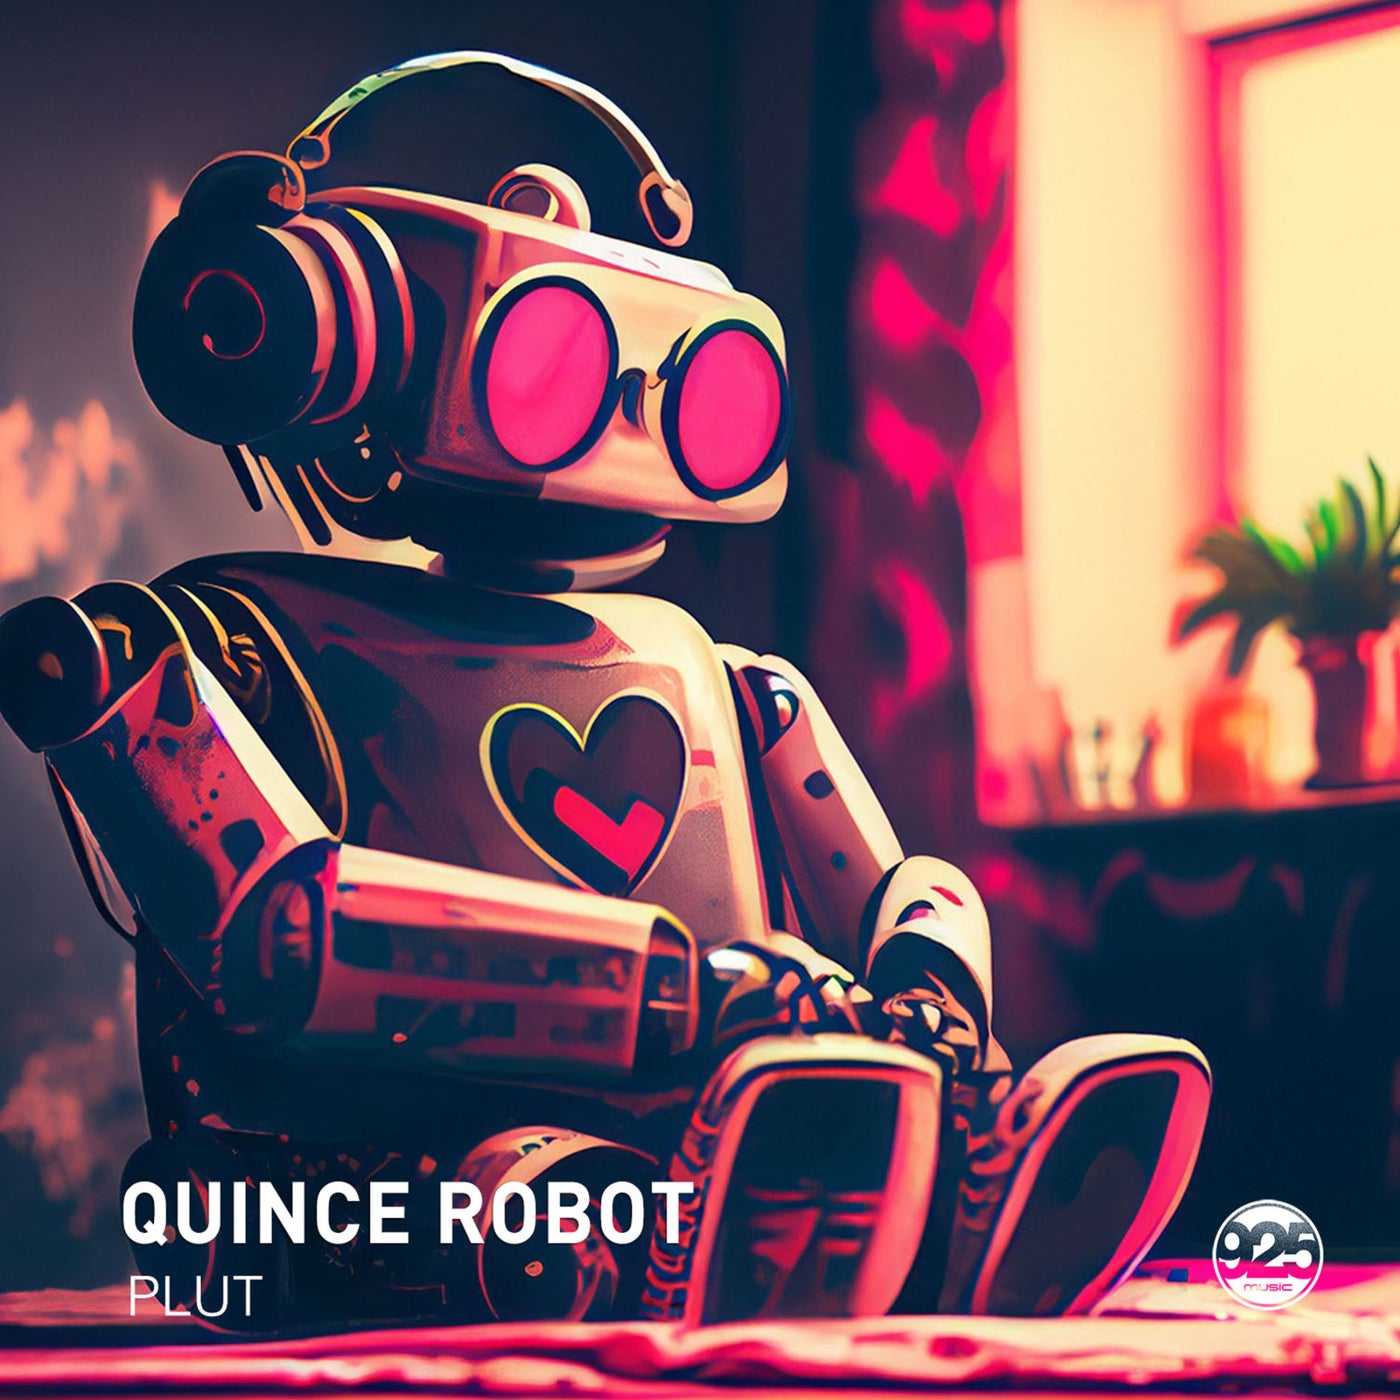 Quince Robot